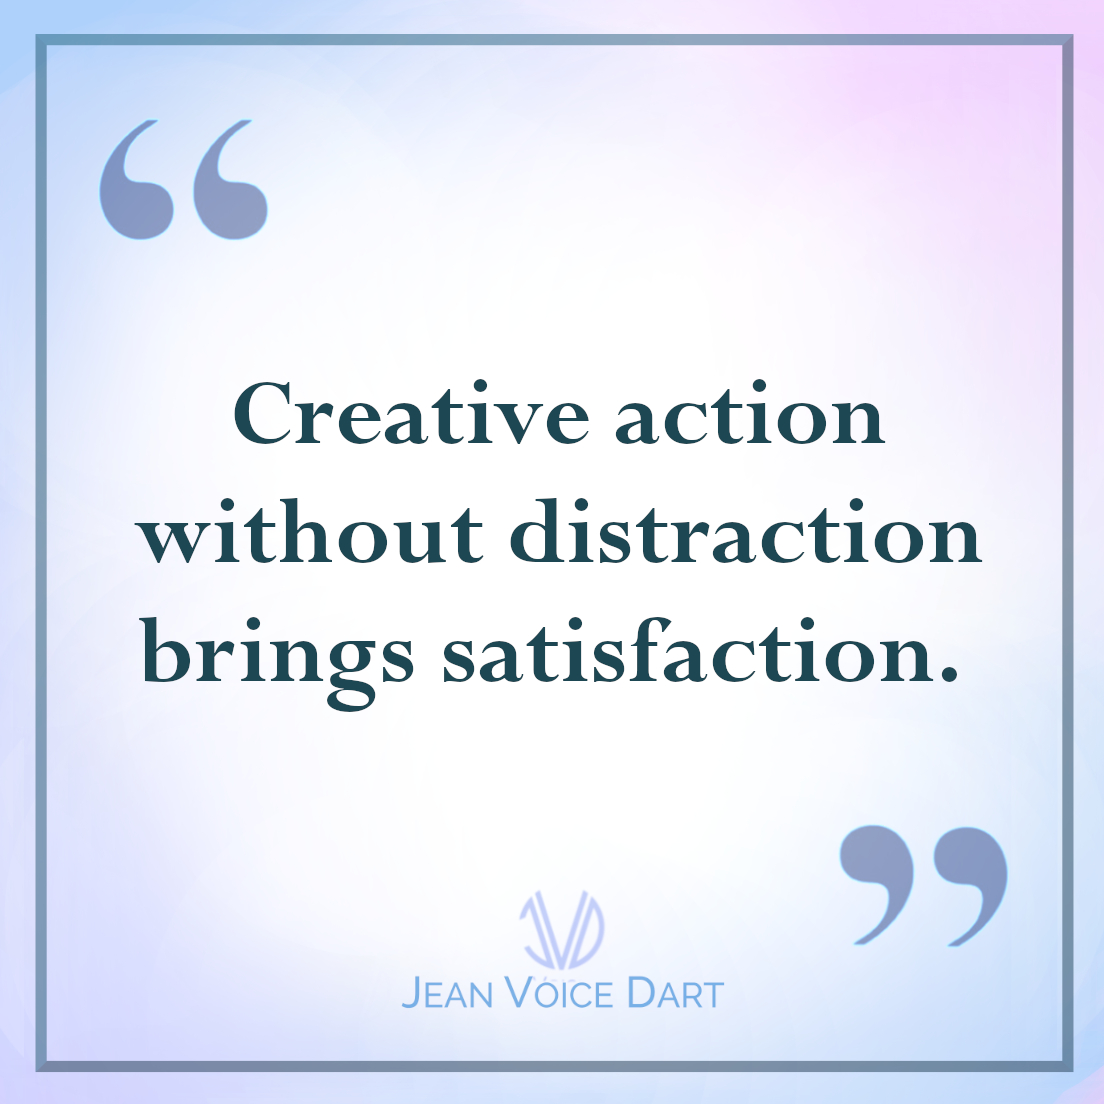 Good evening and good night, creative friends. You are awesome. Creative action brings satisfaction. How did you recently take creative action? 😃💪  #creative #satisfying #creatorschallenge #quotes #goodnight